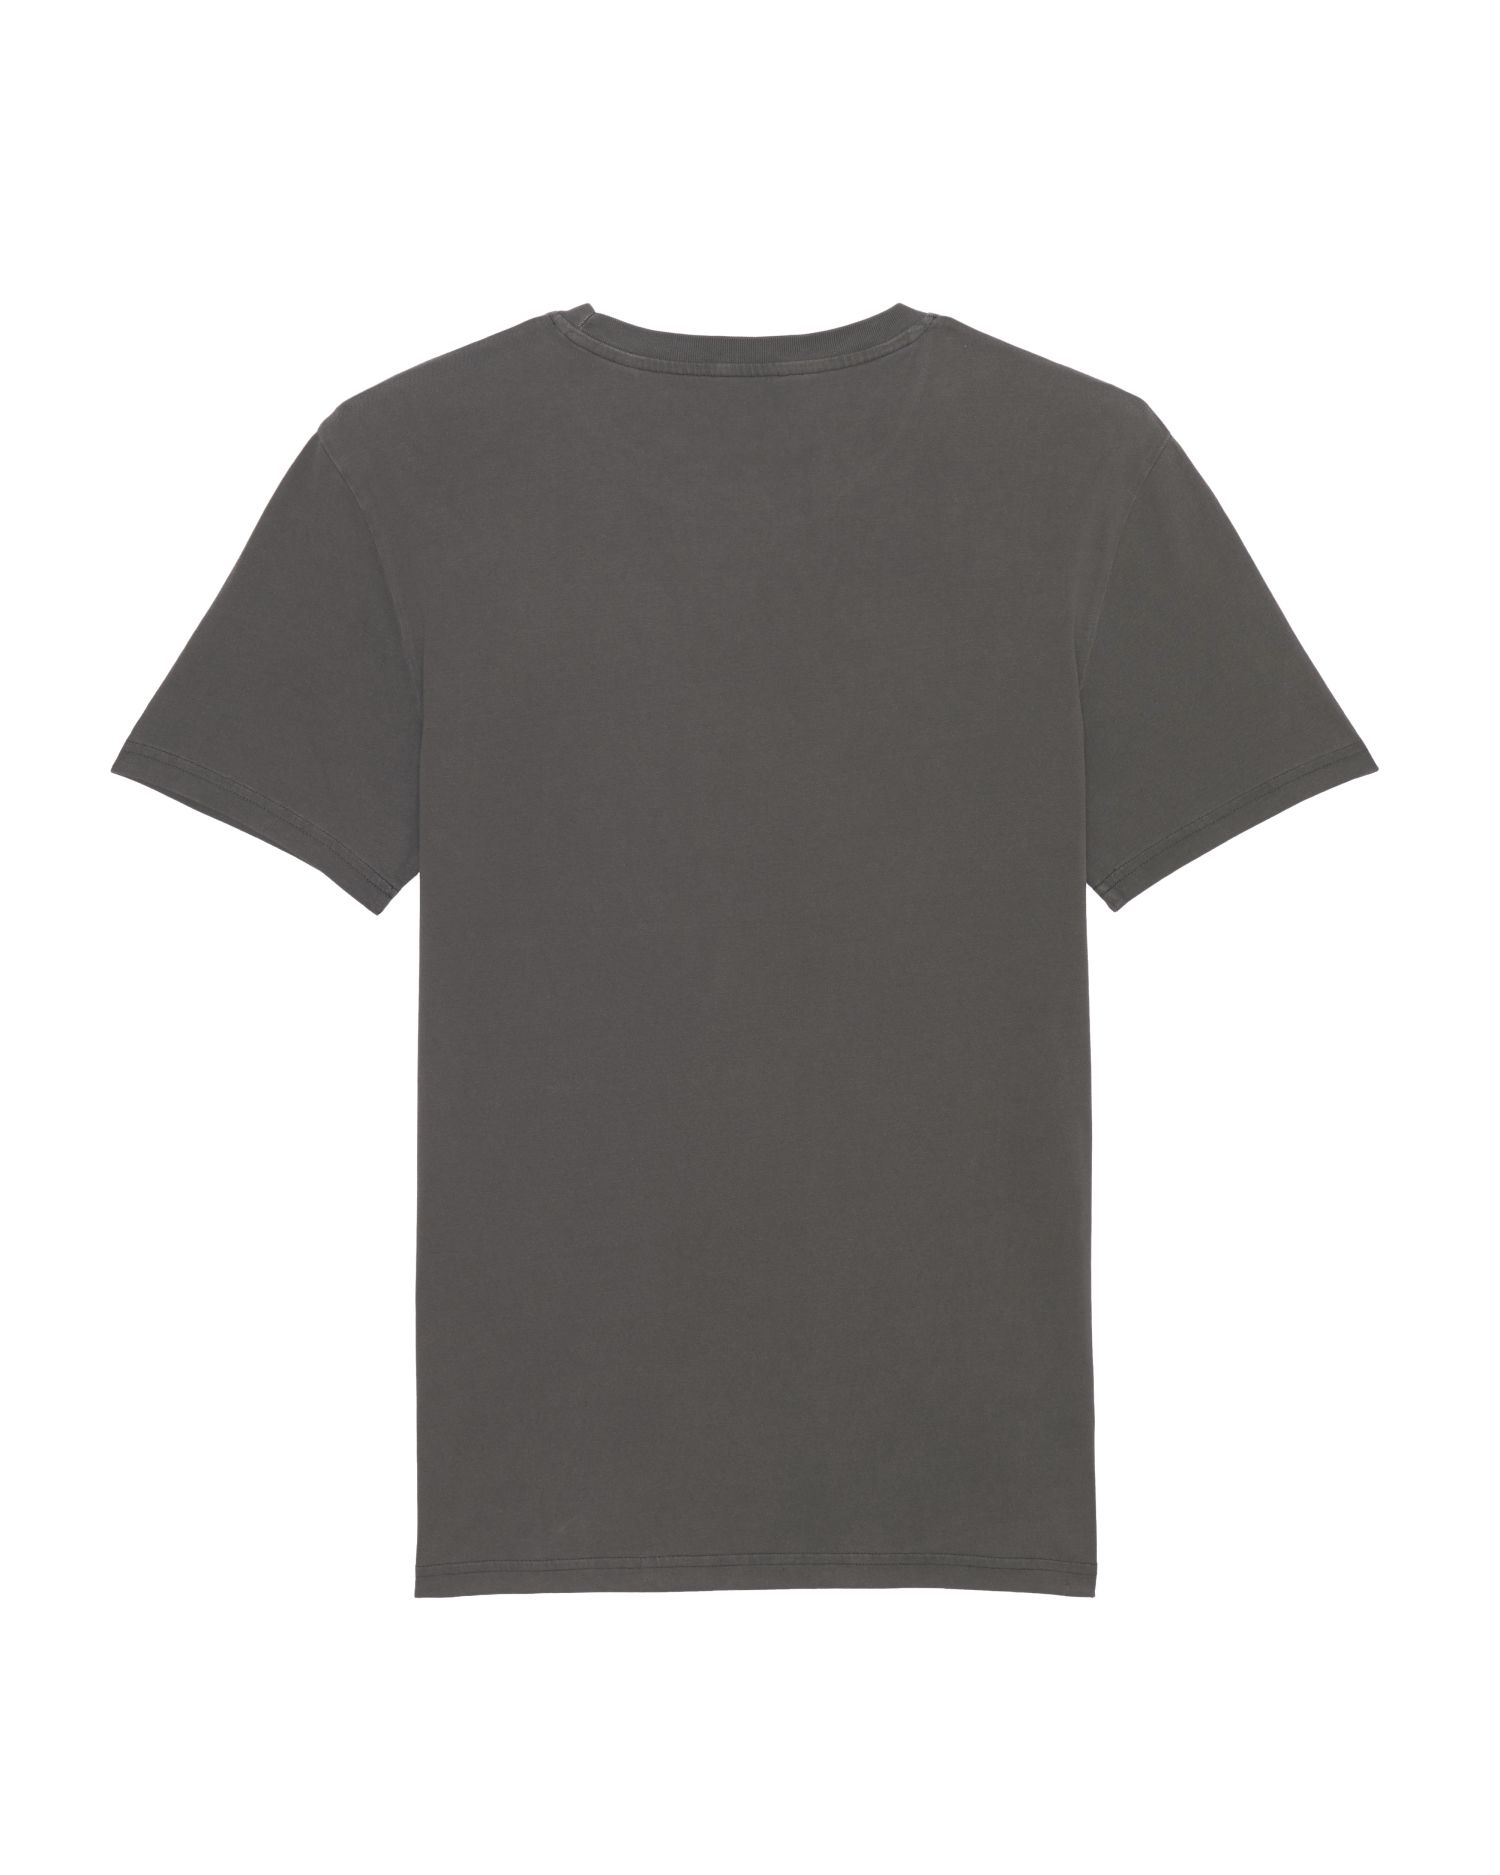 T-Shirt Creator Vintage in Farbe G. Dyed Black